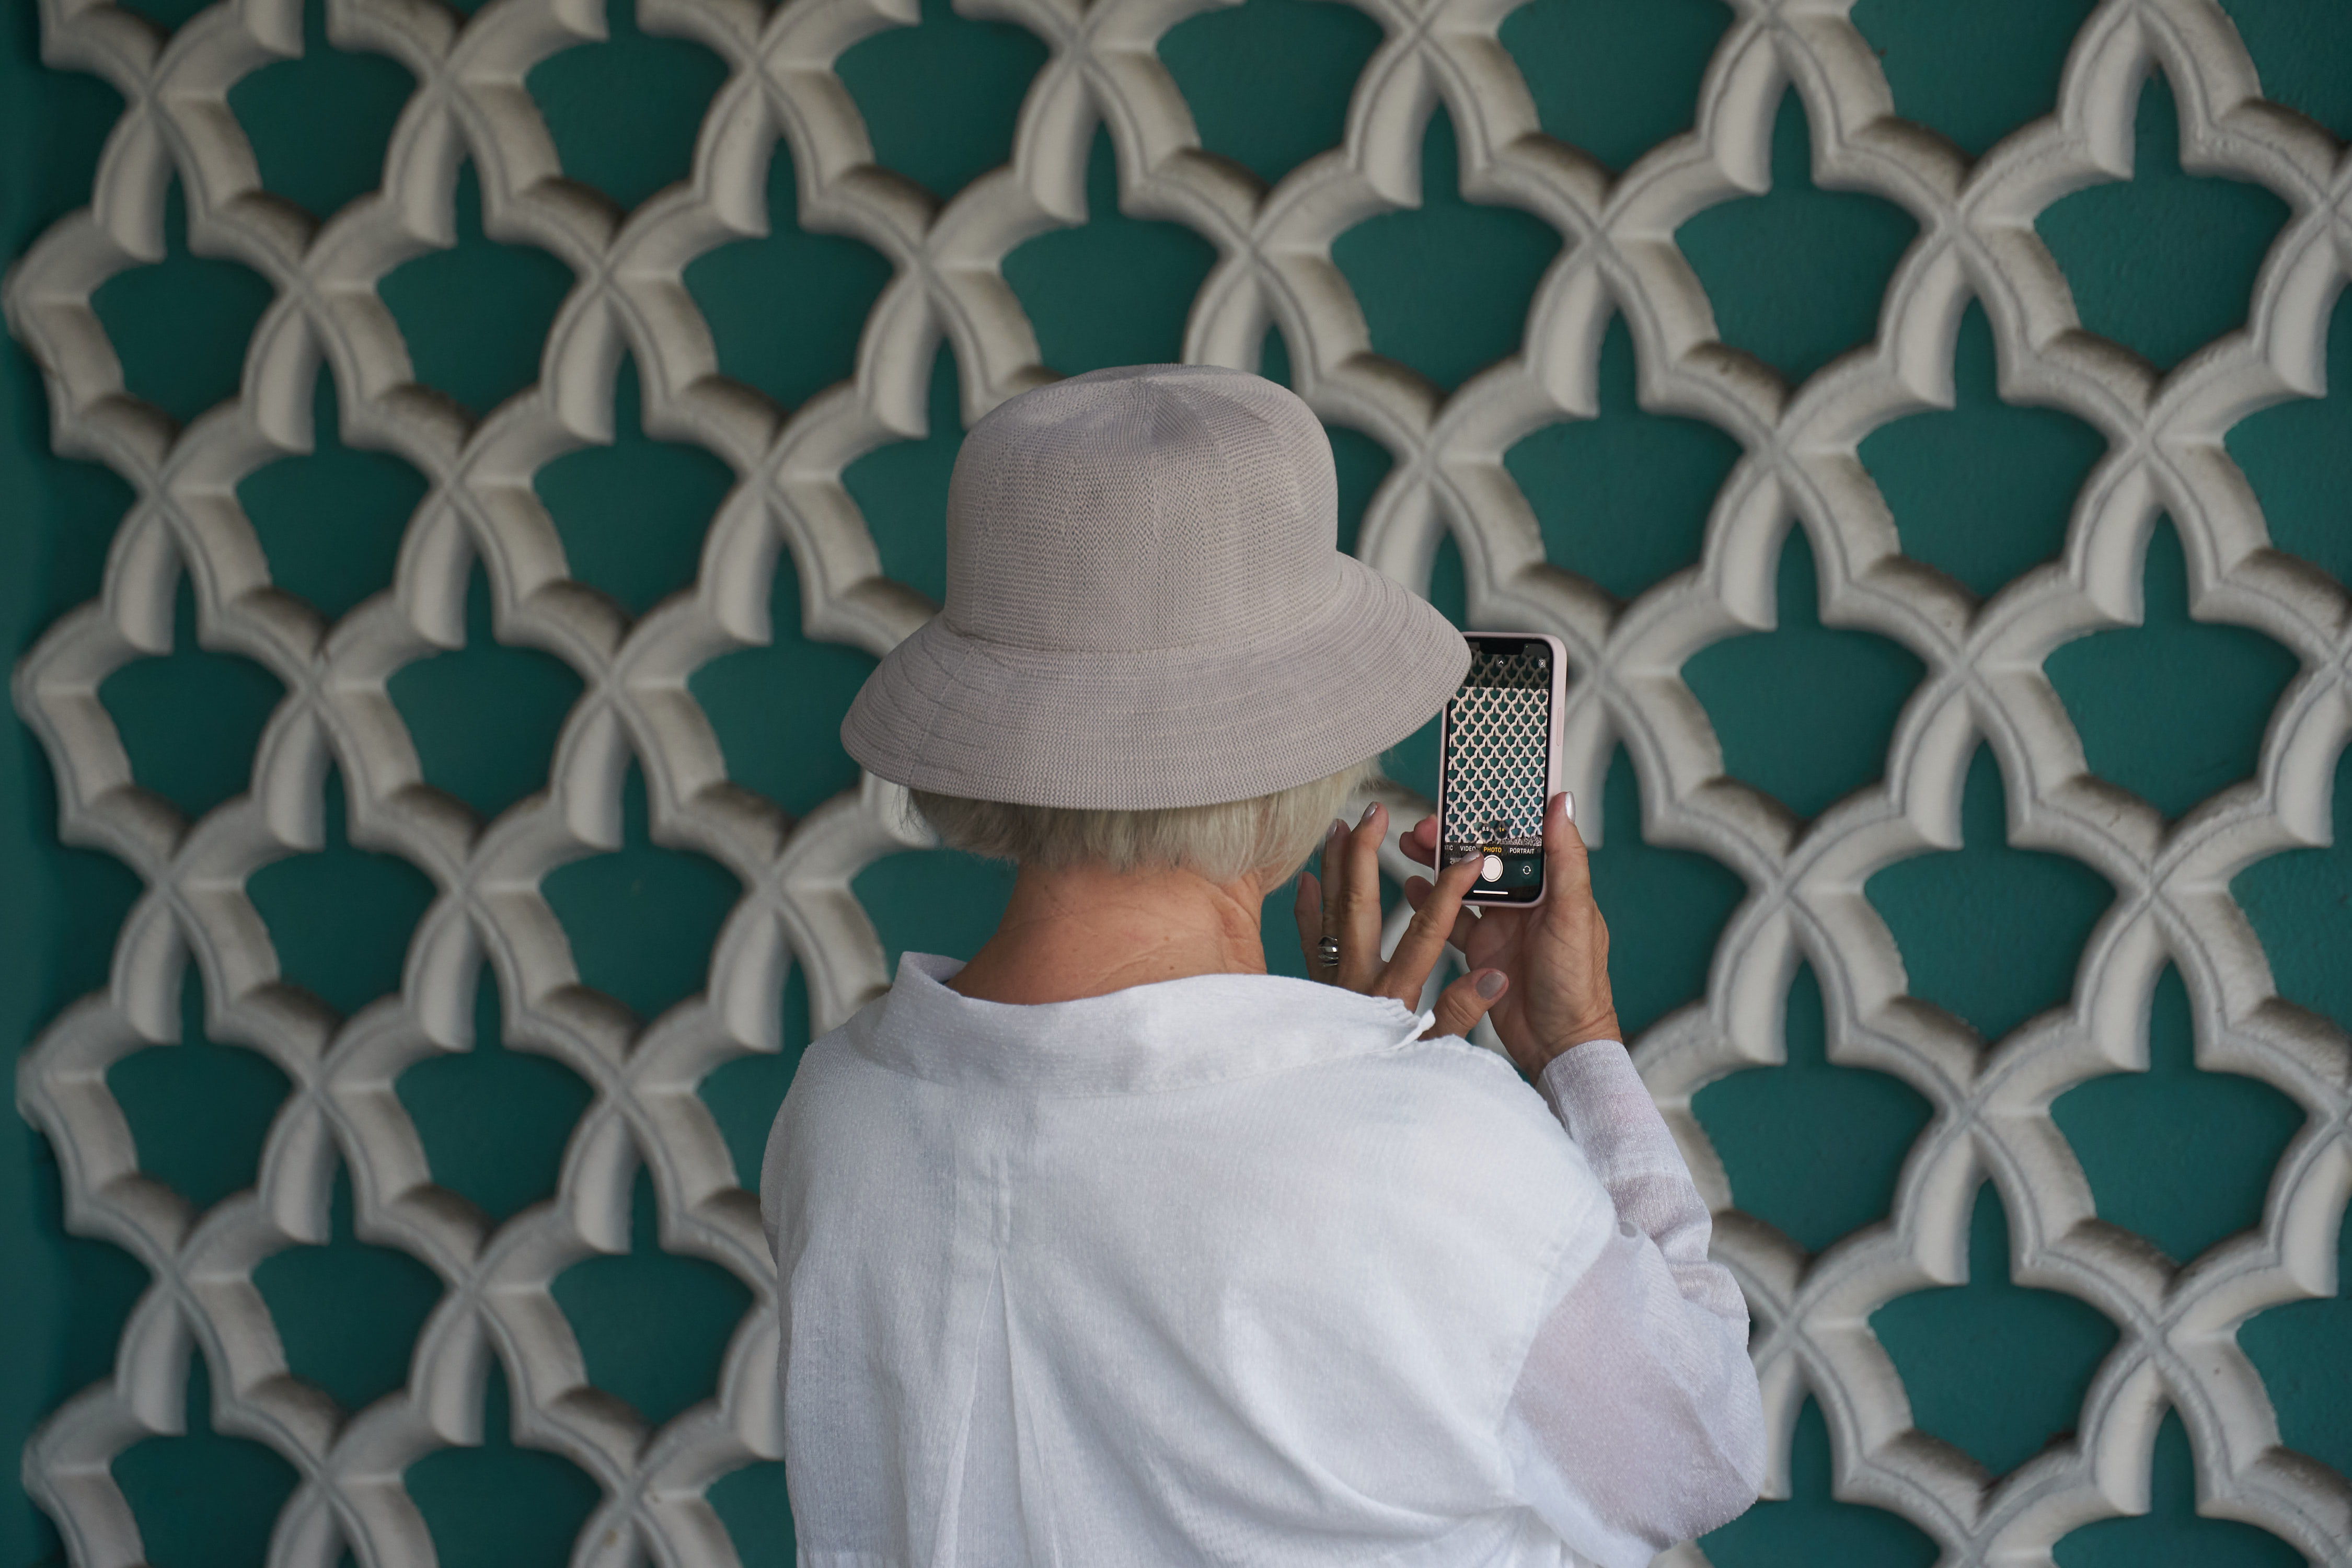 A woman taking a picture of a patterned wall with her cell phone.